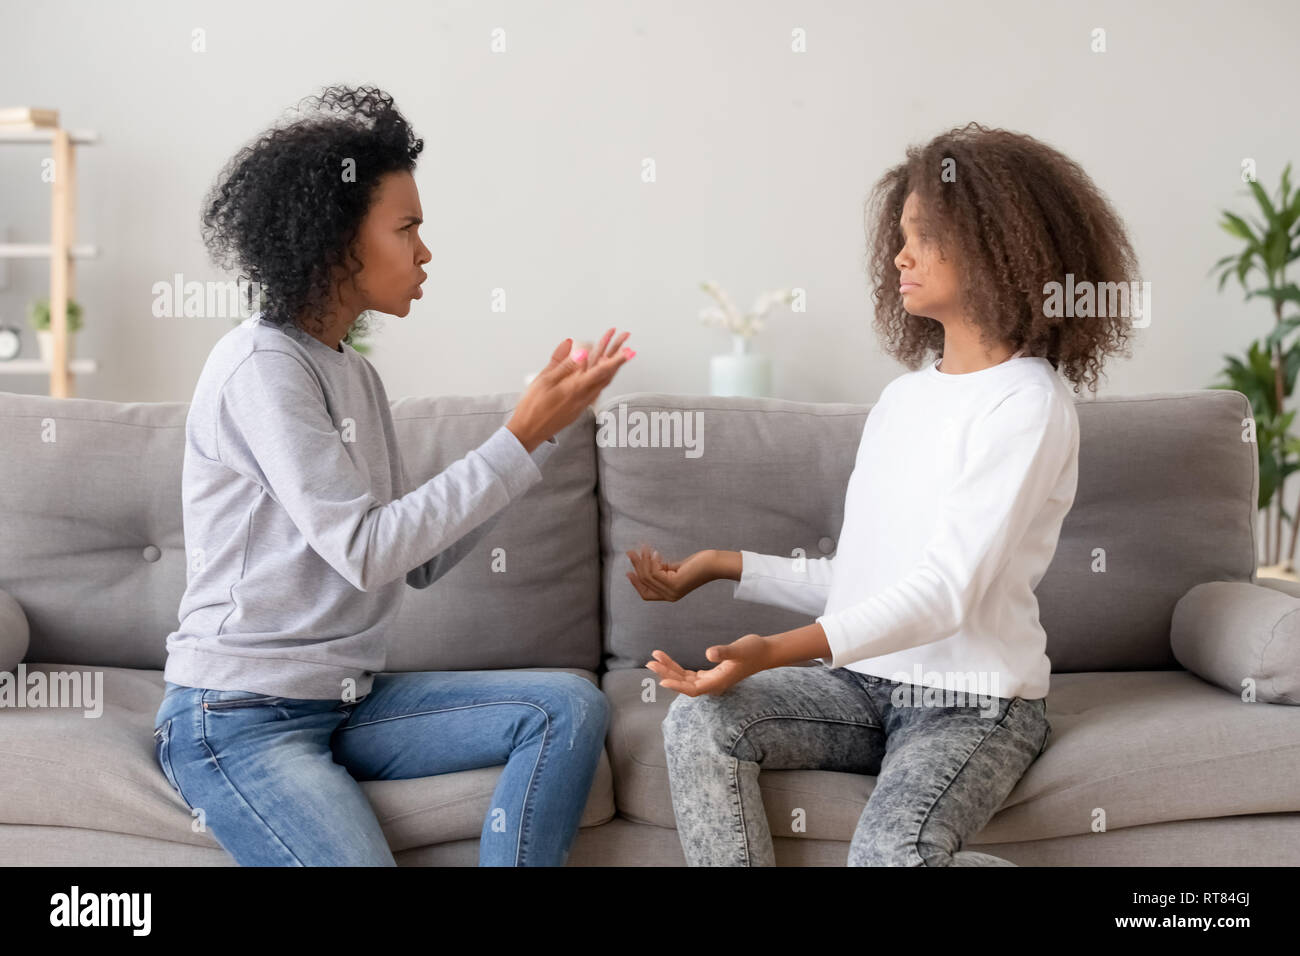 African mother scolding teen daughter sitting on couch at home Stock Photo